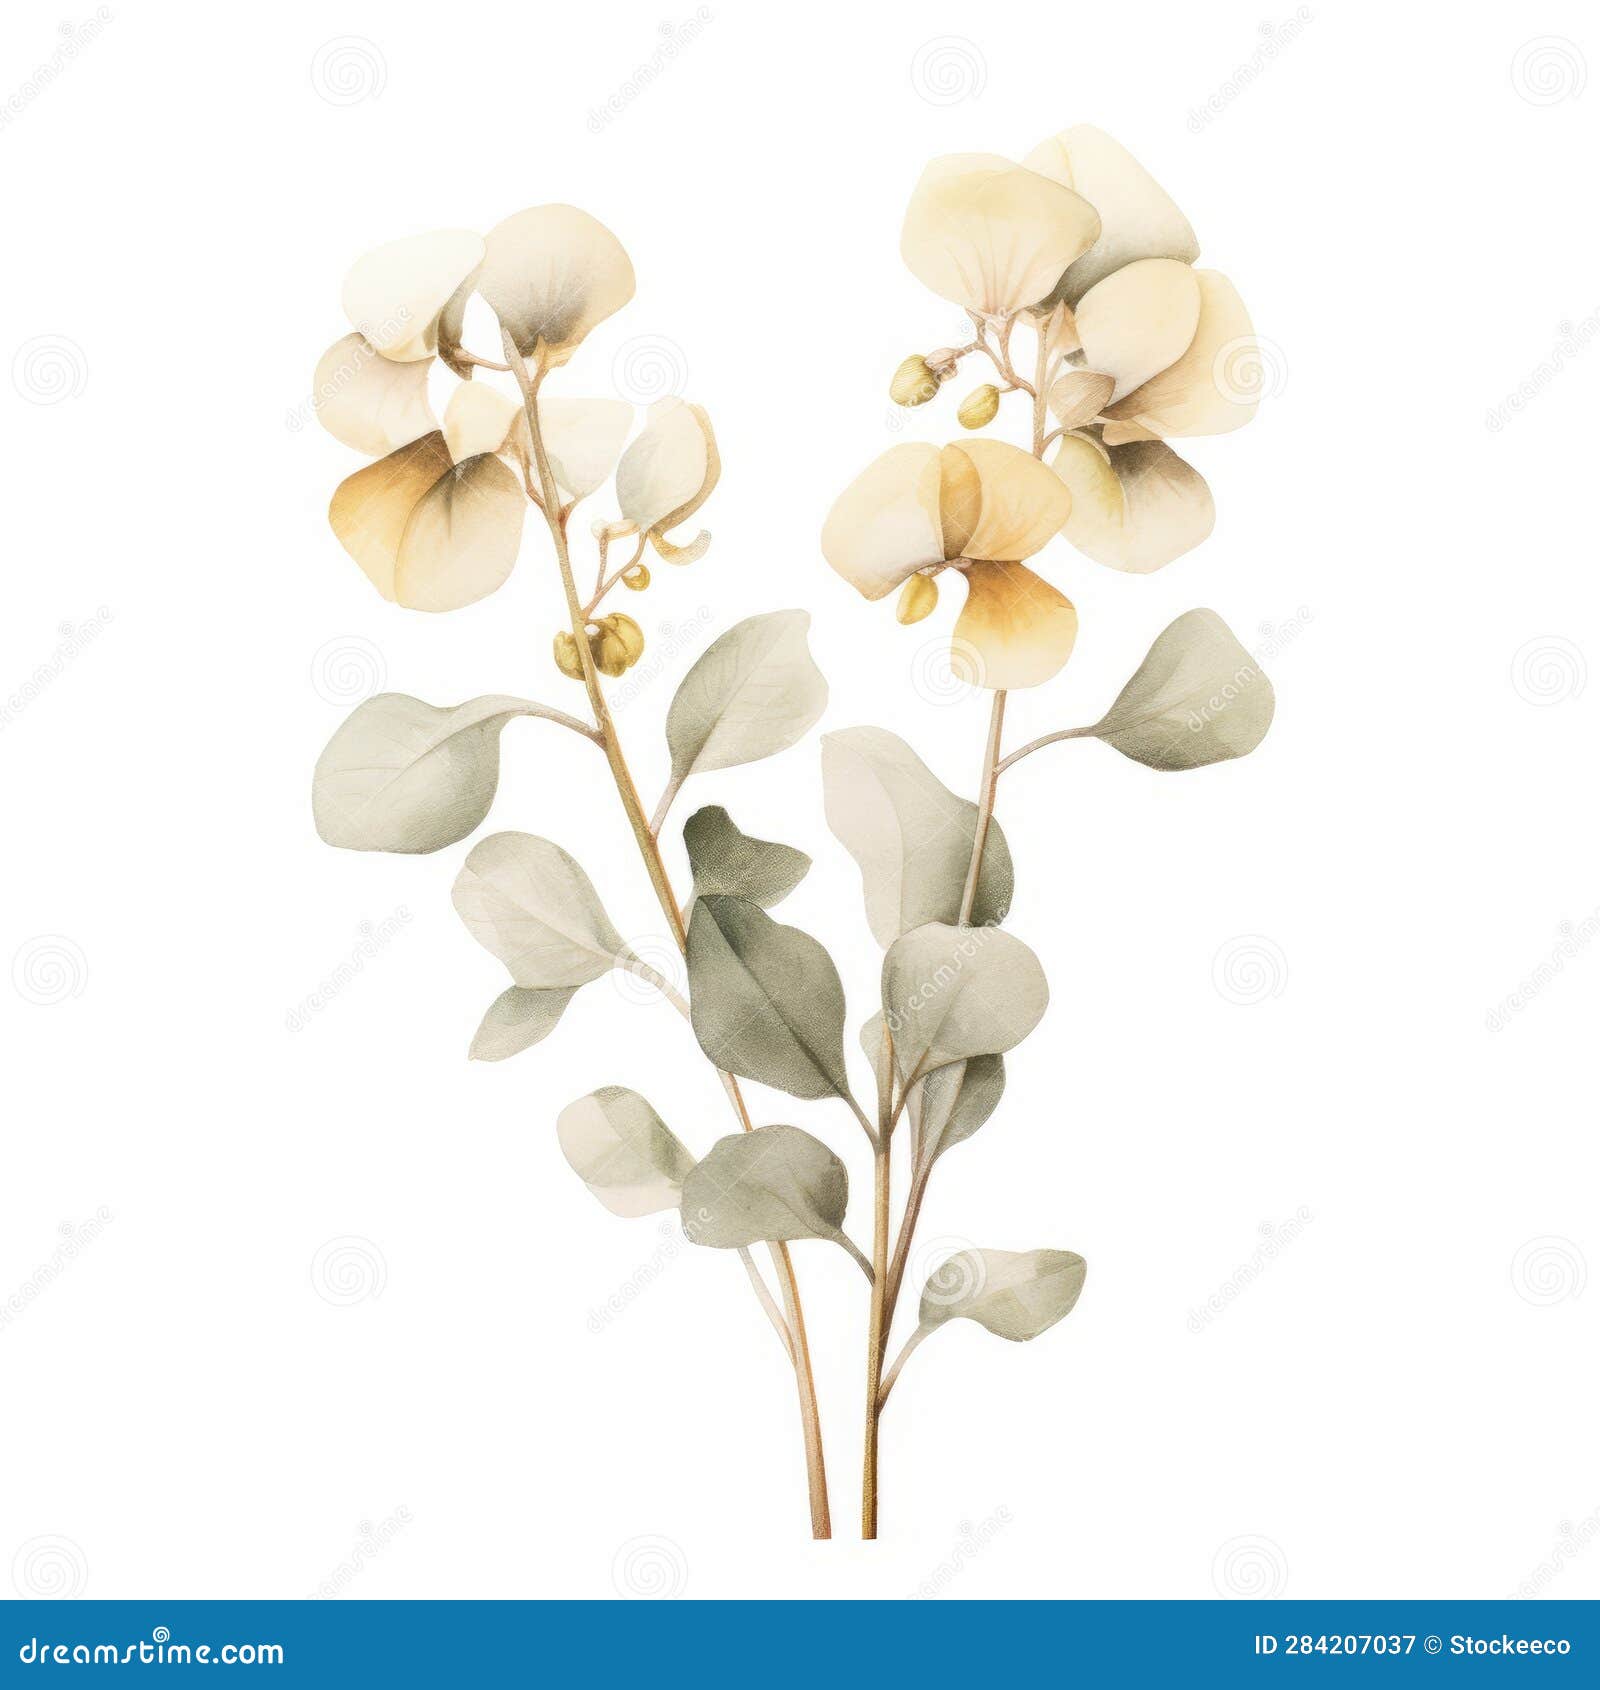 watercolor tropical flowers: minimalist purity in pastel beige and green